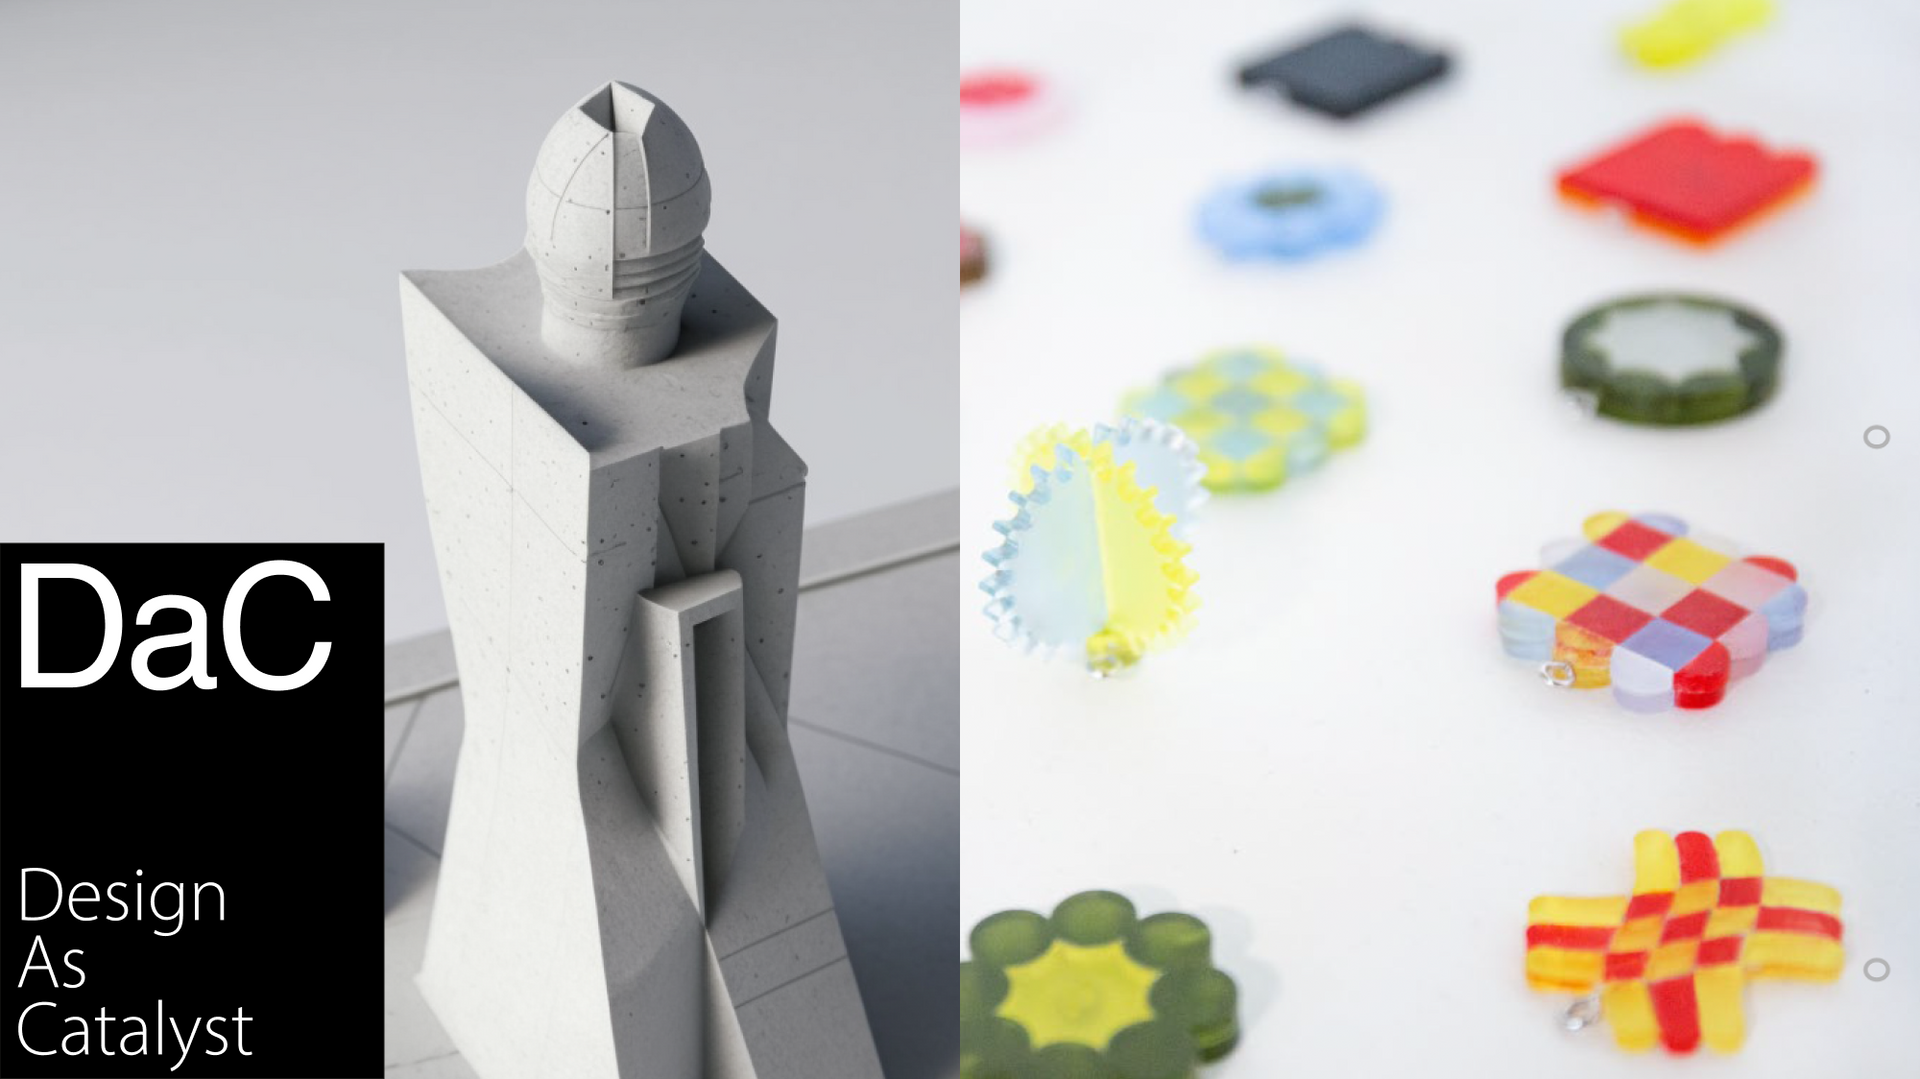 Imagery with two photographs side by side: a grey geometric tower object, and multiple colourful tiny plastic square and circle charms out of focus